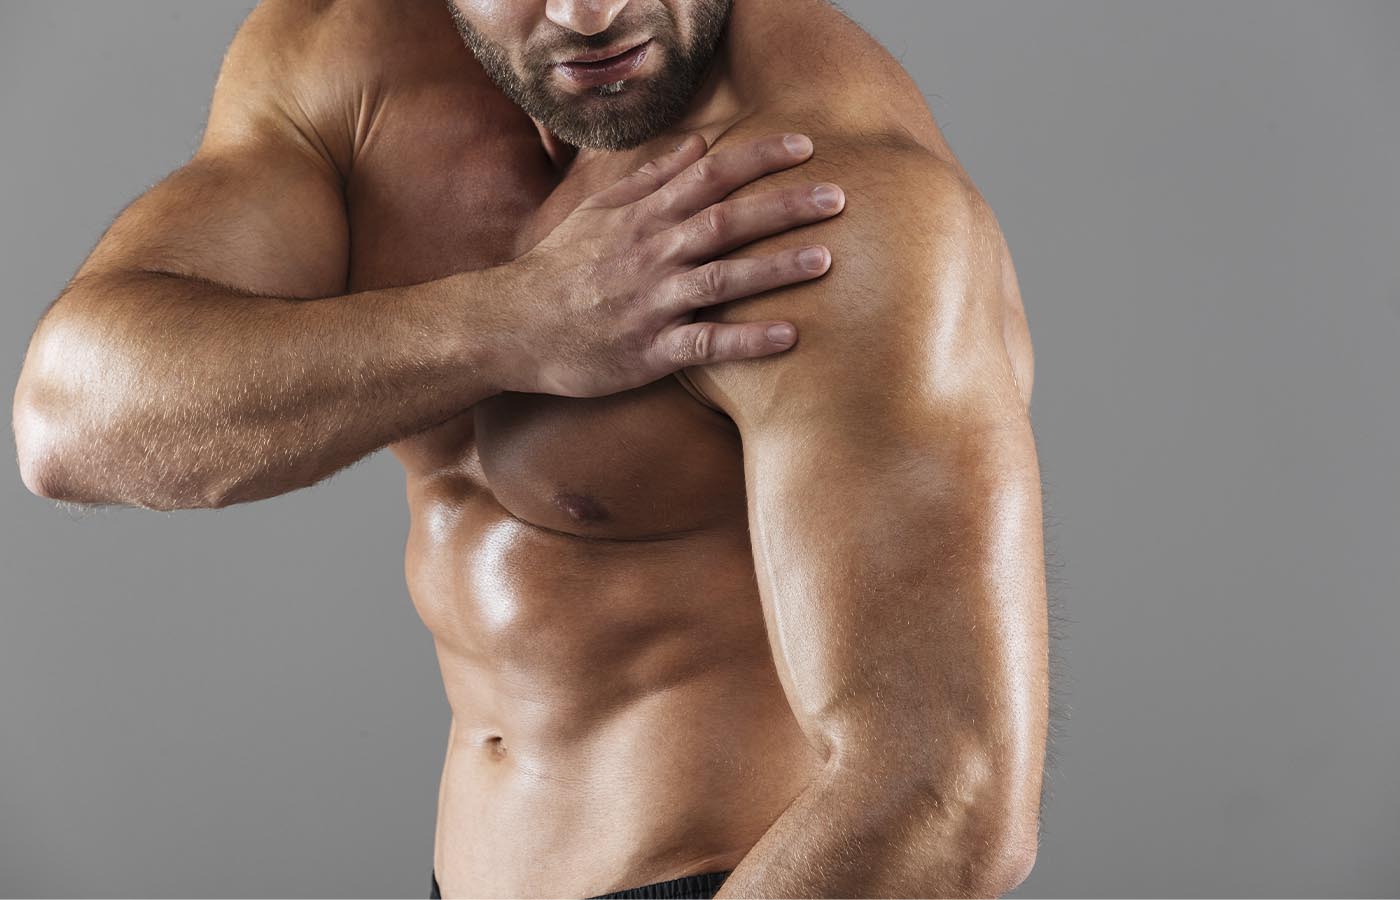 An athletic male rubbing his shoulder